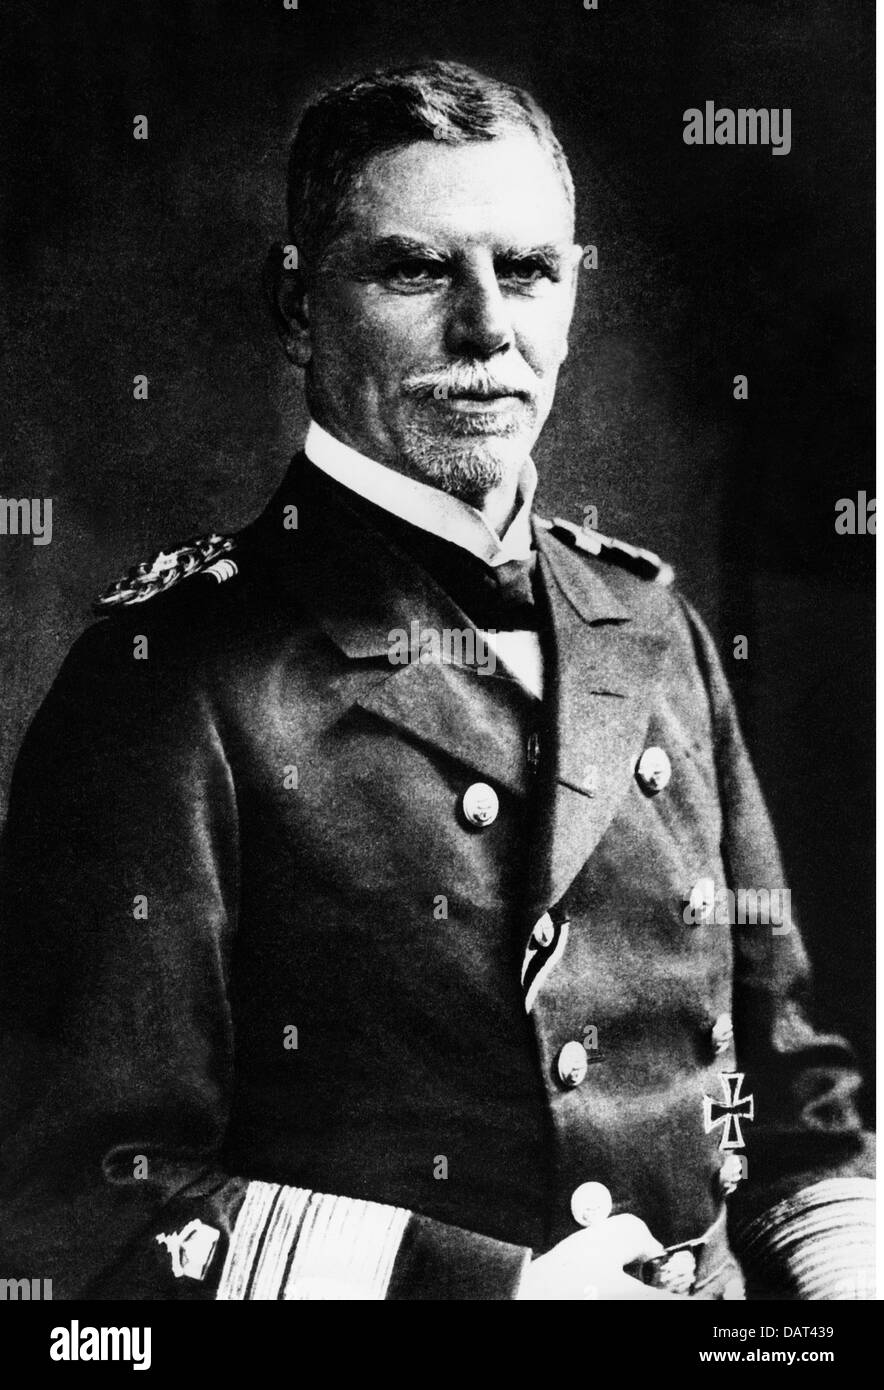 Spee, Maximilian, Reichsgraf (Count of the Holy Roman Empire) von, 22.6.1861 - 8.12.1914, German admiral since 1910, chief of the German cruiser squadron in East Asia, half length, circa 1910, Stock Photo